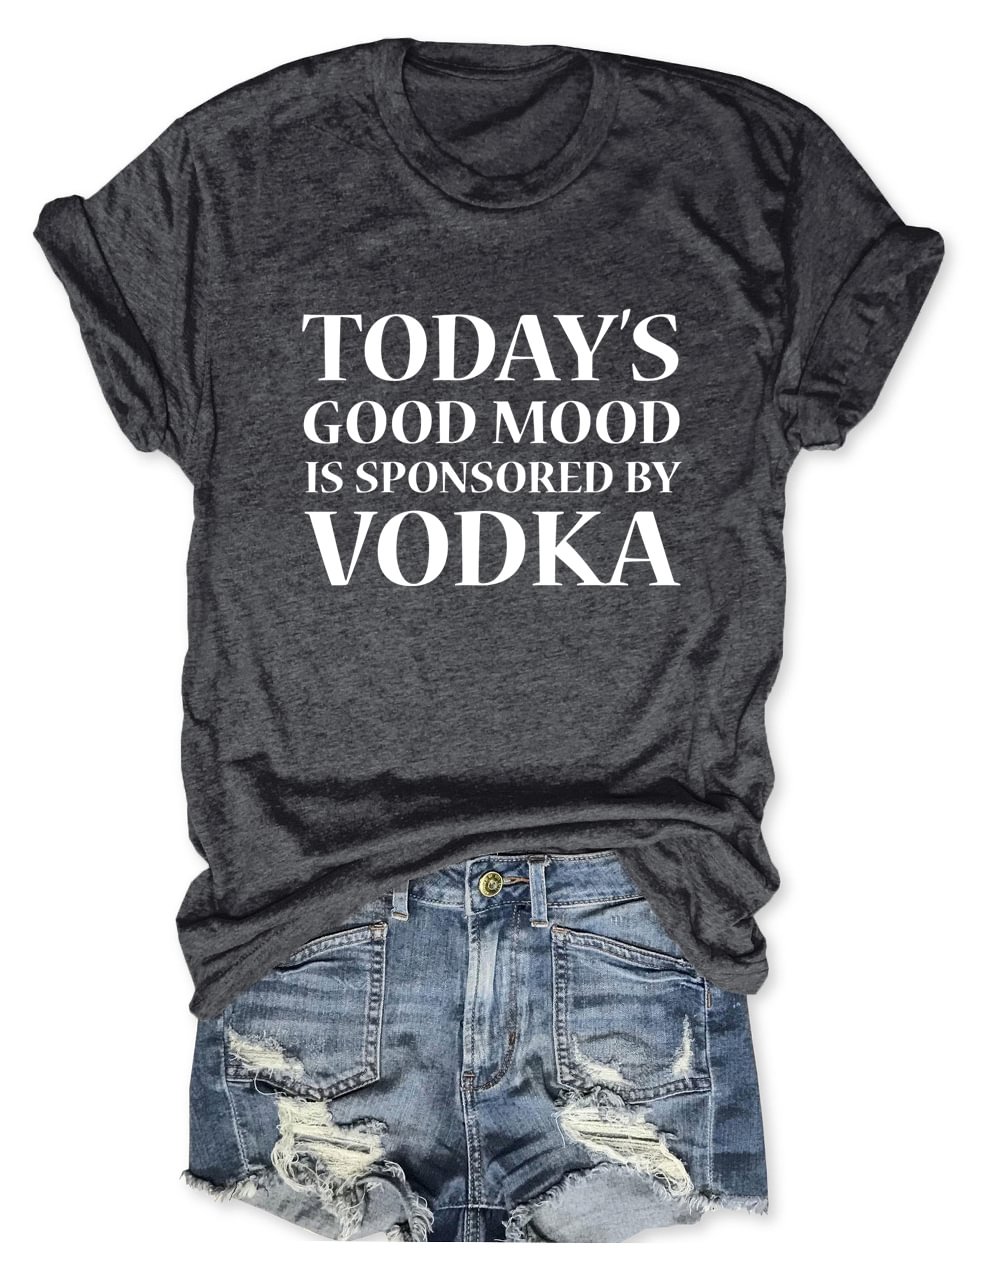 Today's Good Mood is Sponsored by Vodka T-Shirt